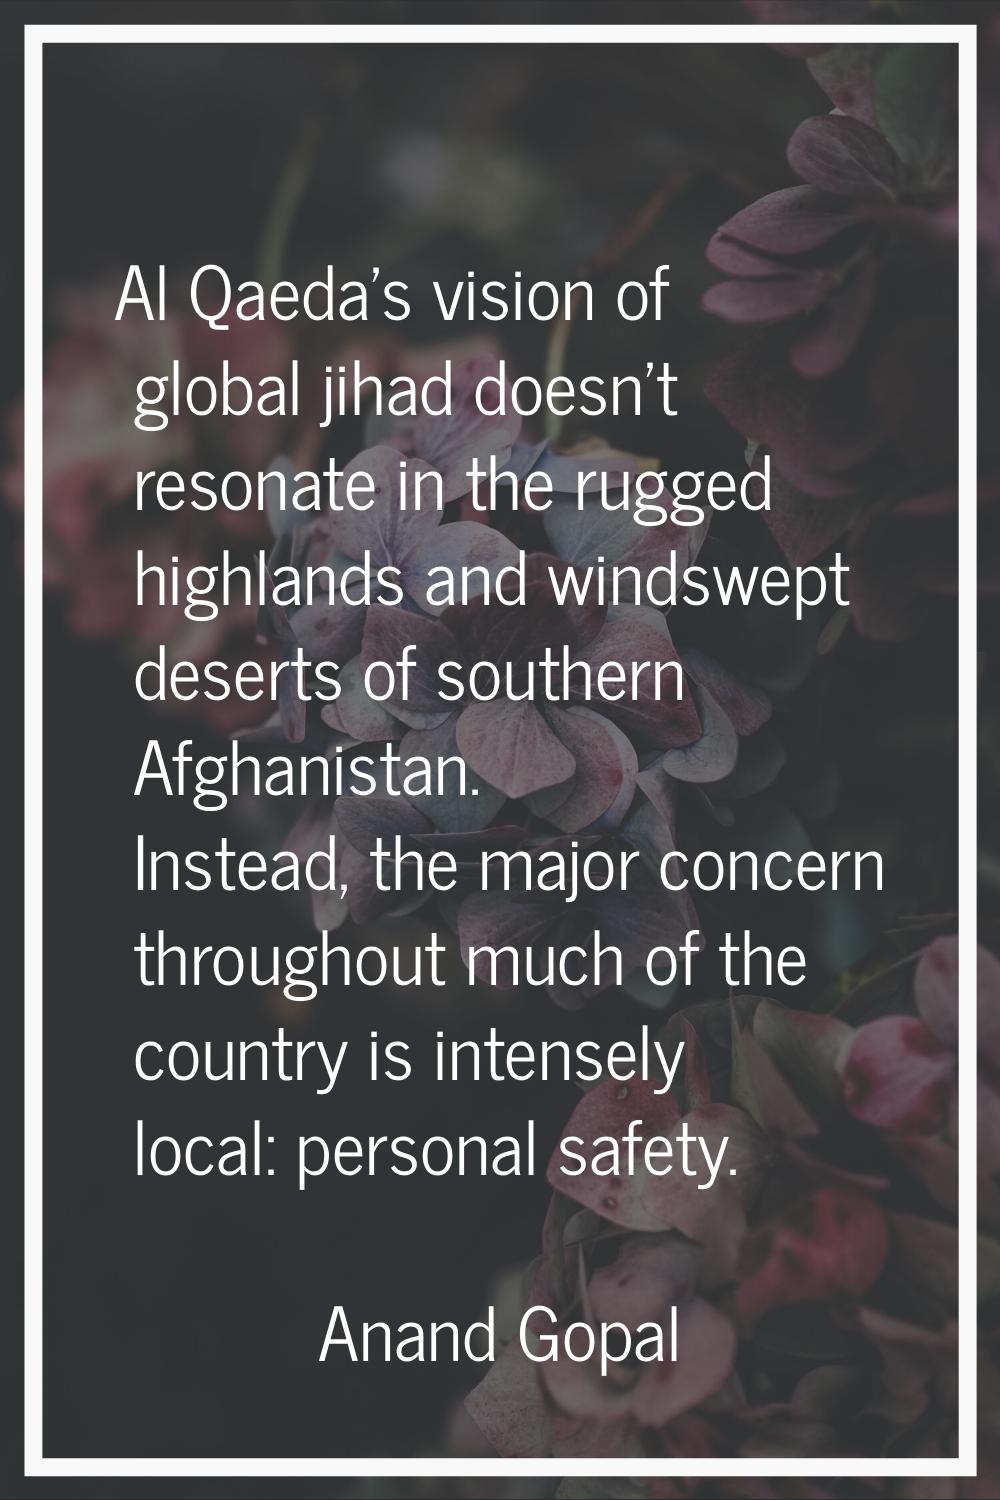 Al Qaeda's vision of global jihad doesn't resonate in the rugged highlands and windswept deserts of